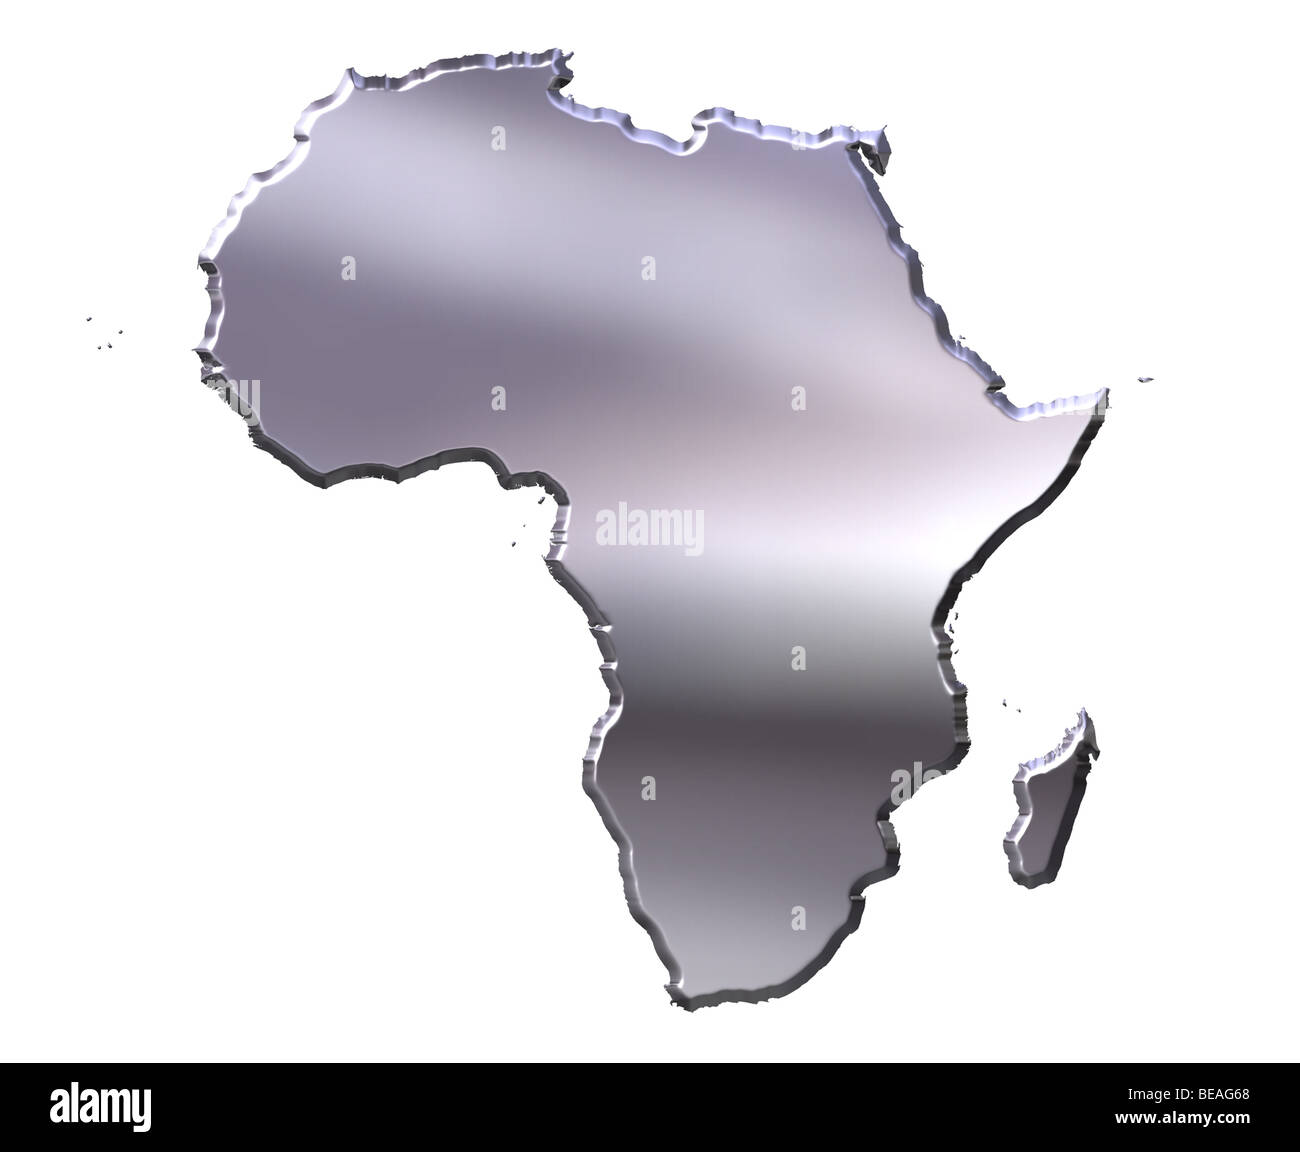 Africa 3d silver map Stock Photo